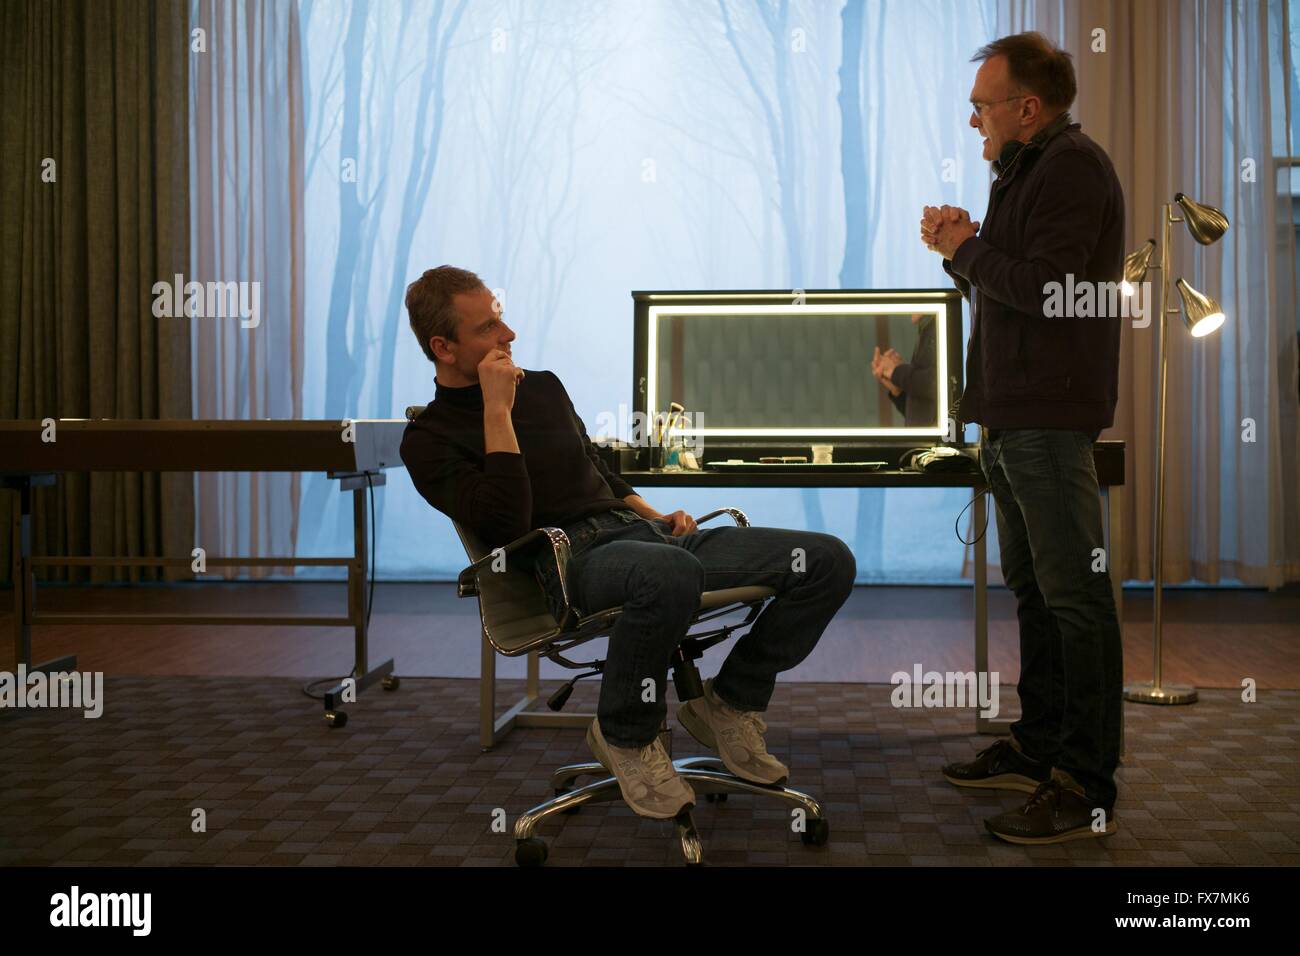 Steve Jobs Year : 2016 USA / UK Director : Danny Boyle Michael Fassbender, Danny Boyle Shooting picture Stock Photo